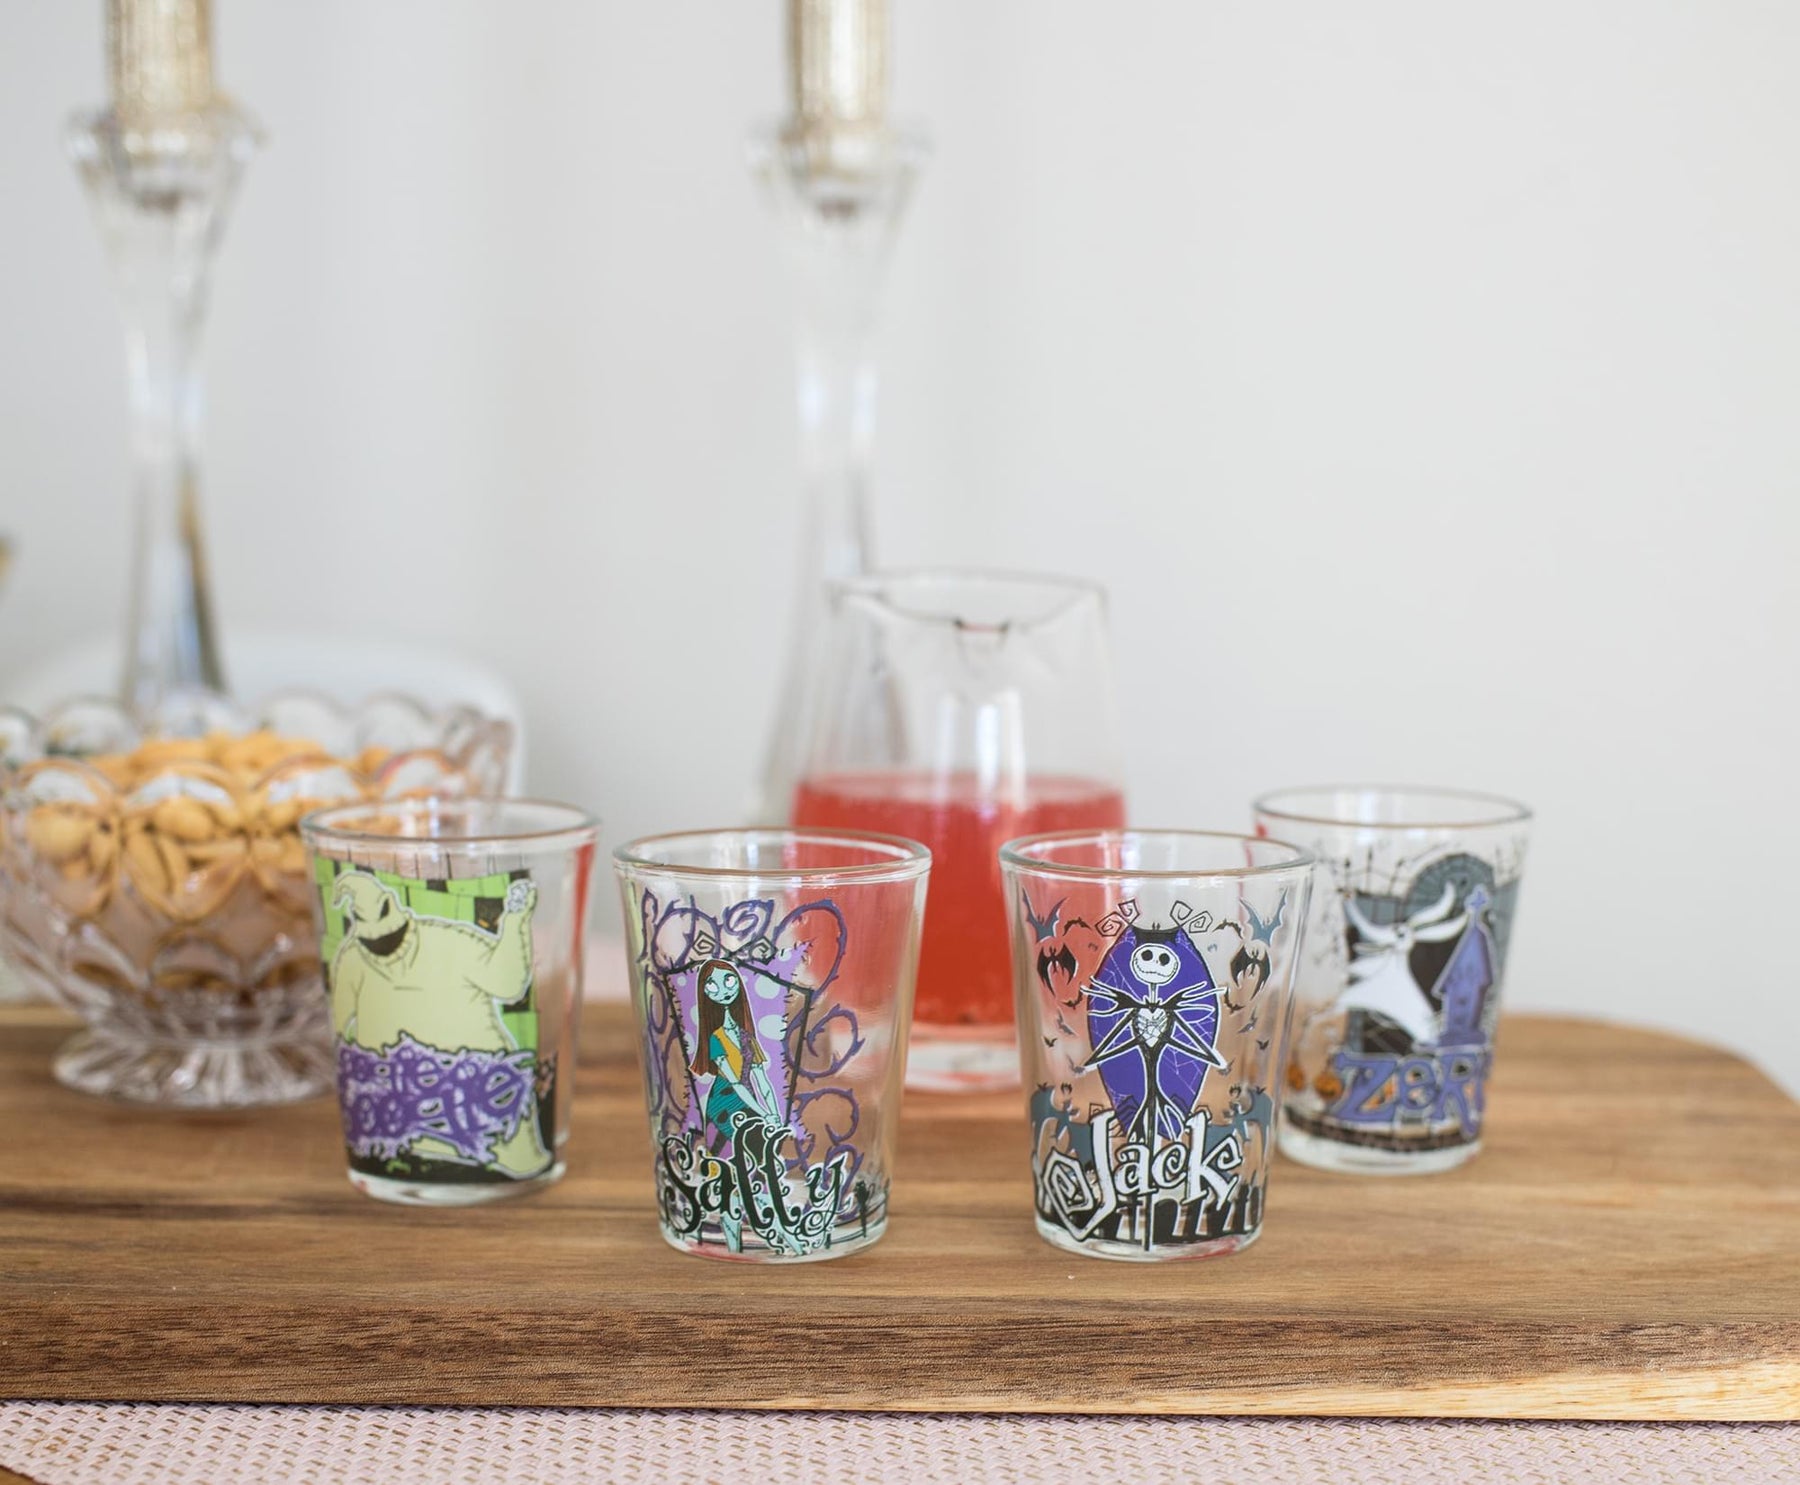 The Nightmare Before Christmas Characters 1.5-Ounce Mini Glasses | Set Of 4